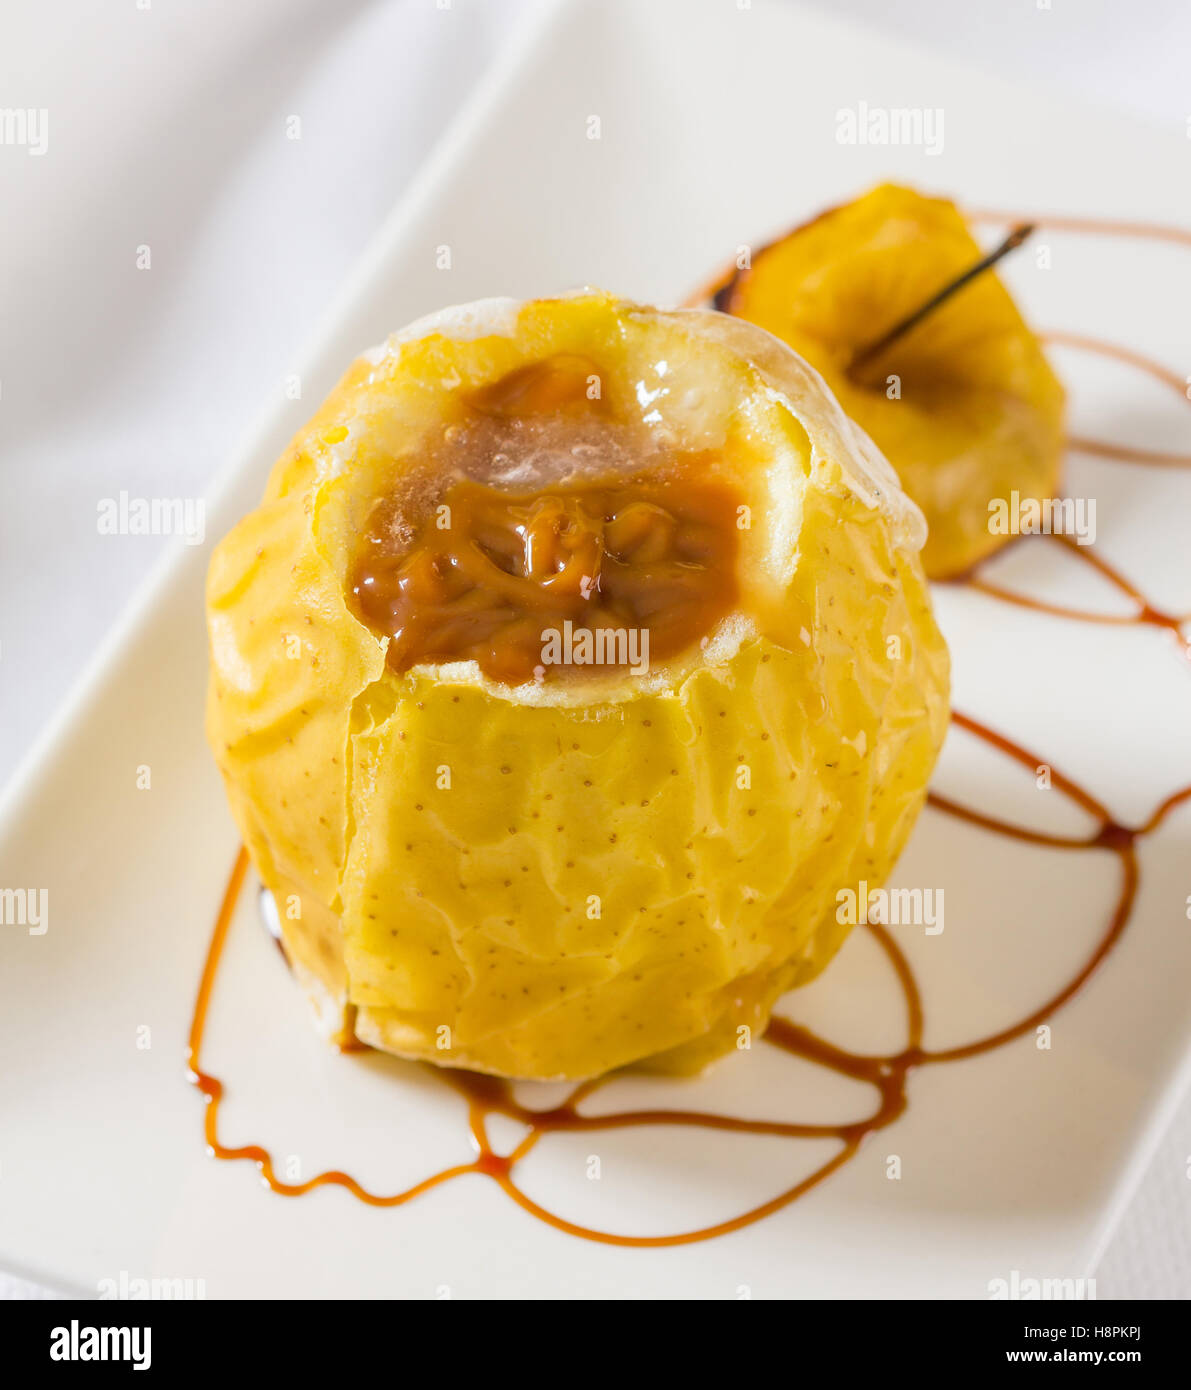 Oven baked apple filled with dulce de leche, a speciality from Argentina. Stock Photo